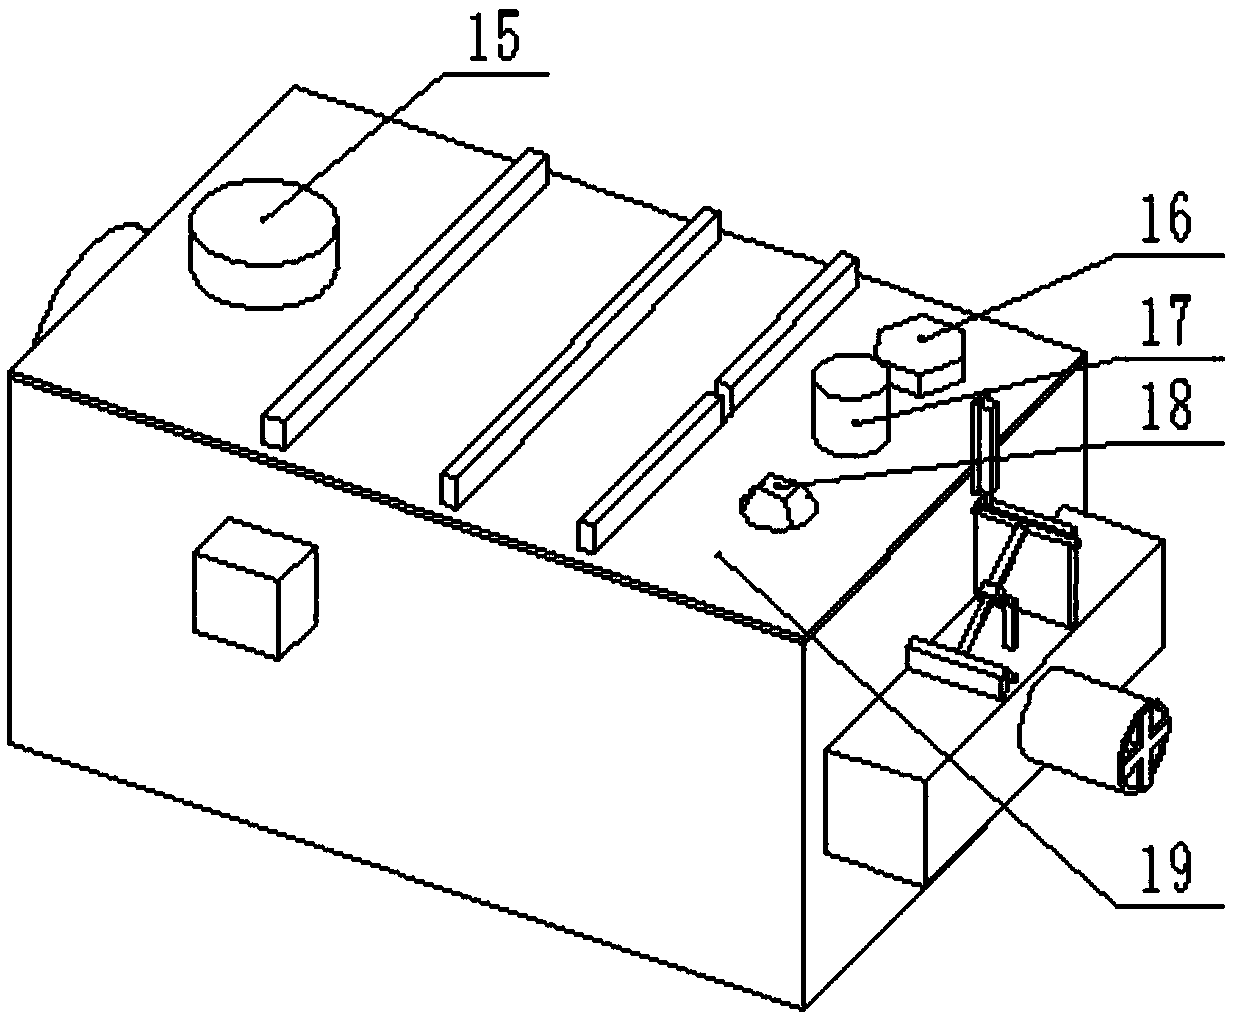 Air purification device for medical operating room